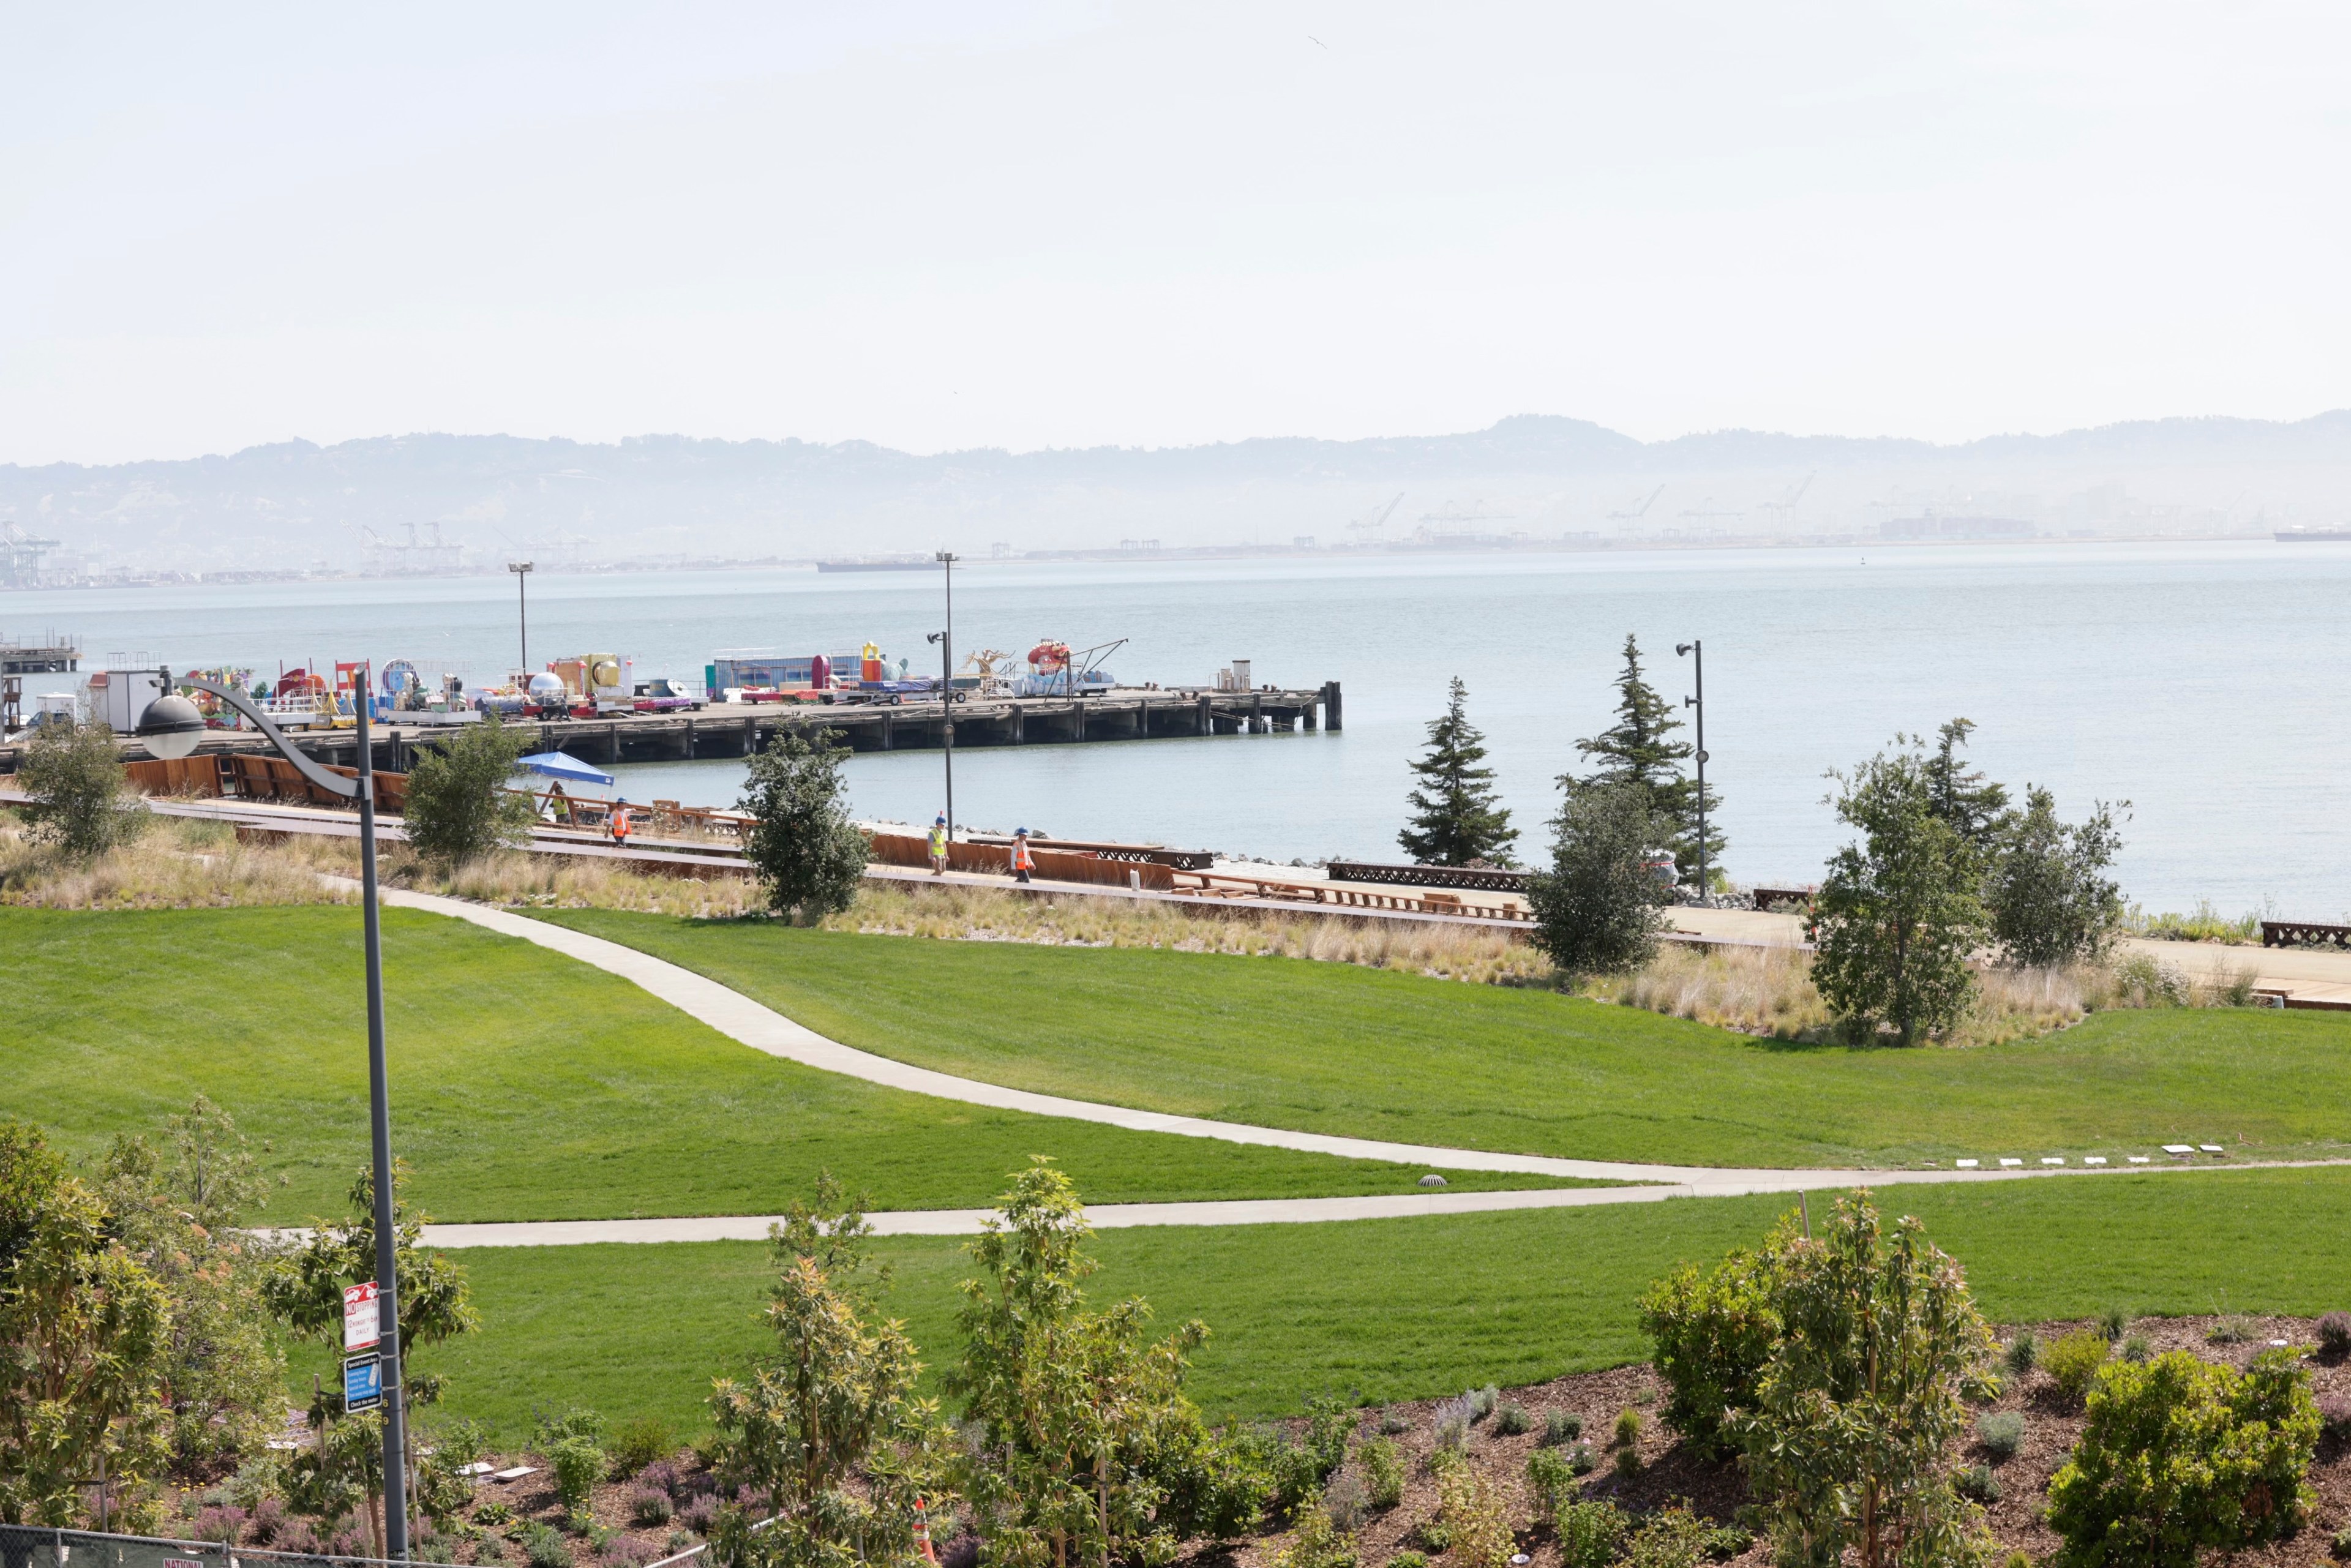 The image shows a waterfront park with a lush green lawn, winding paths, and some trees, leading to a dock with colorful containers and equipment by a calm, expansive body of water.